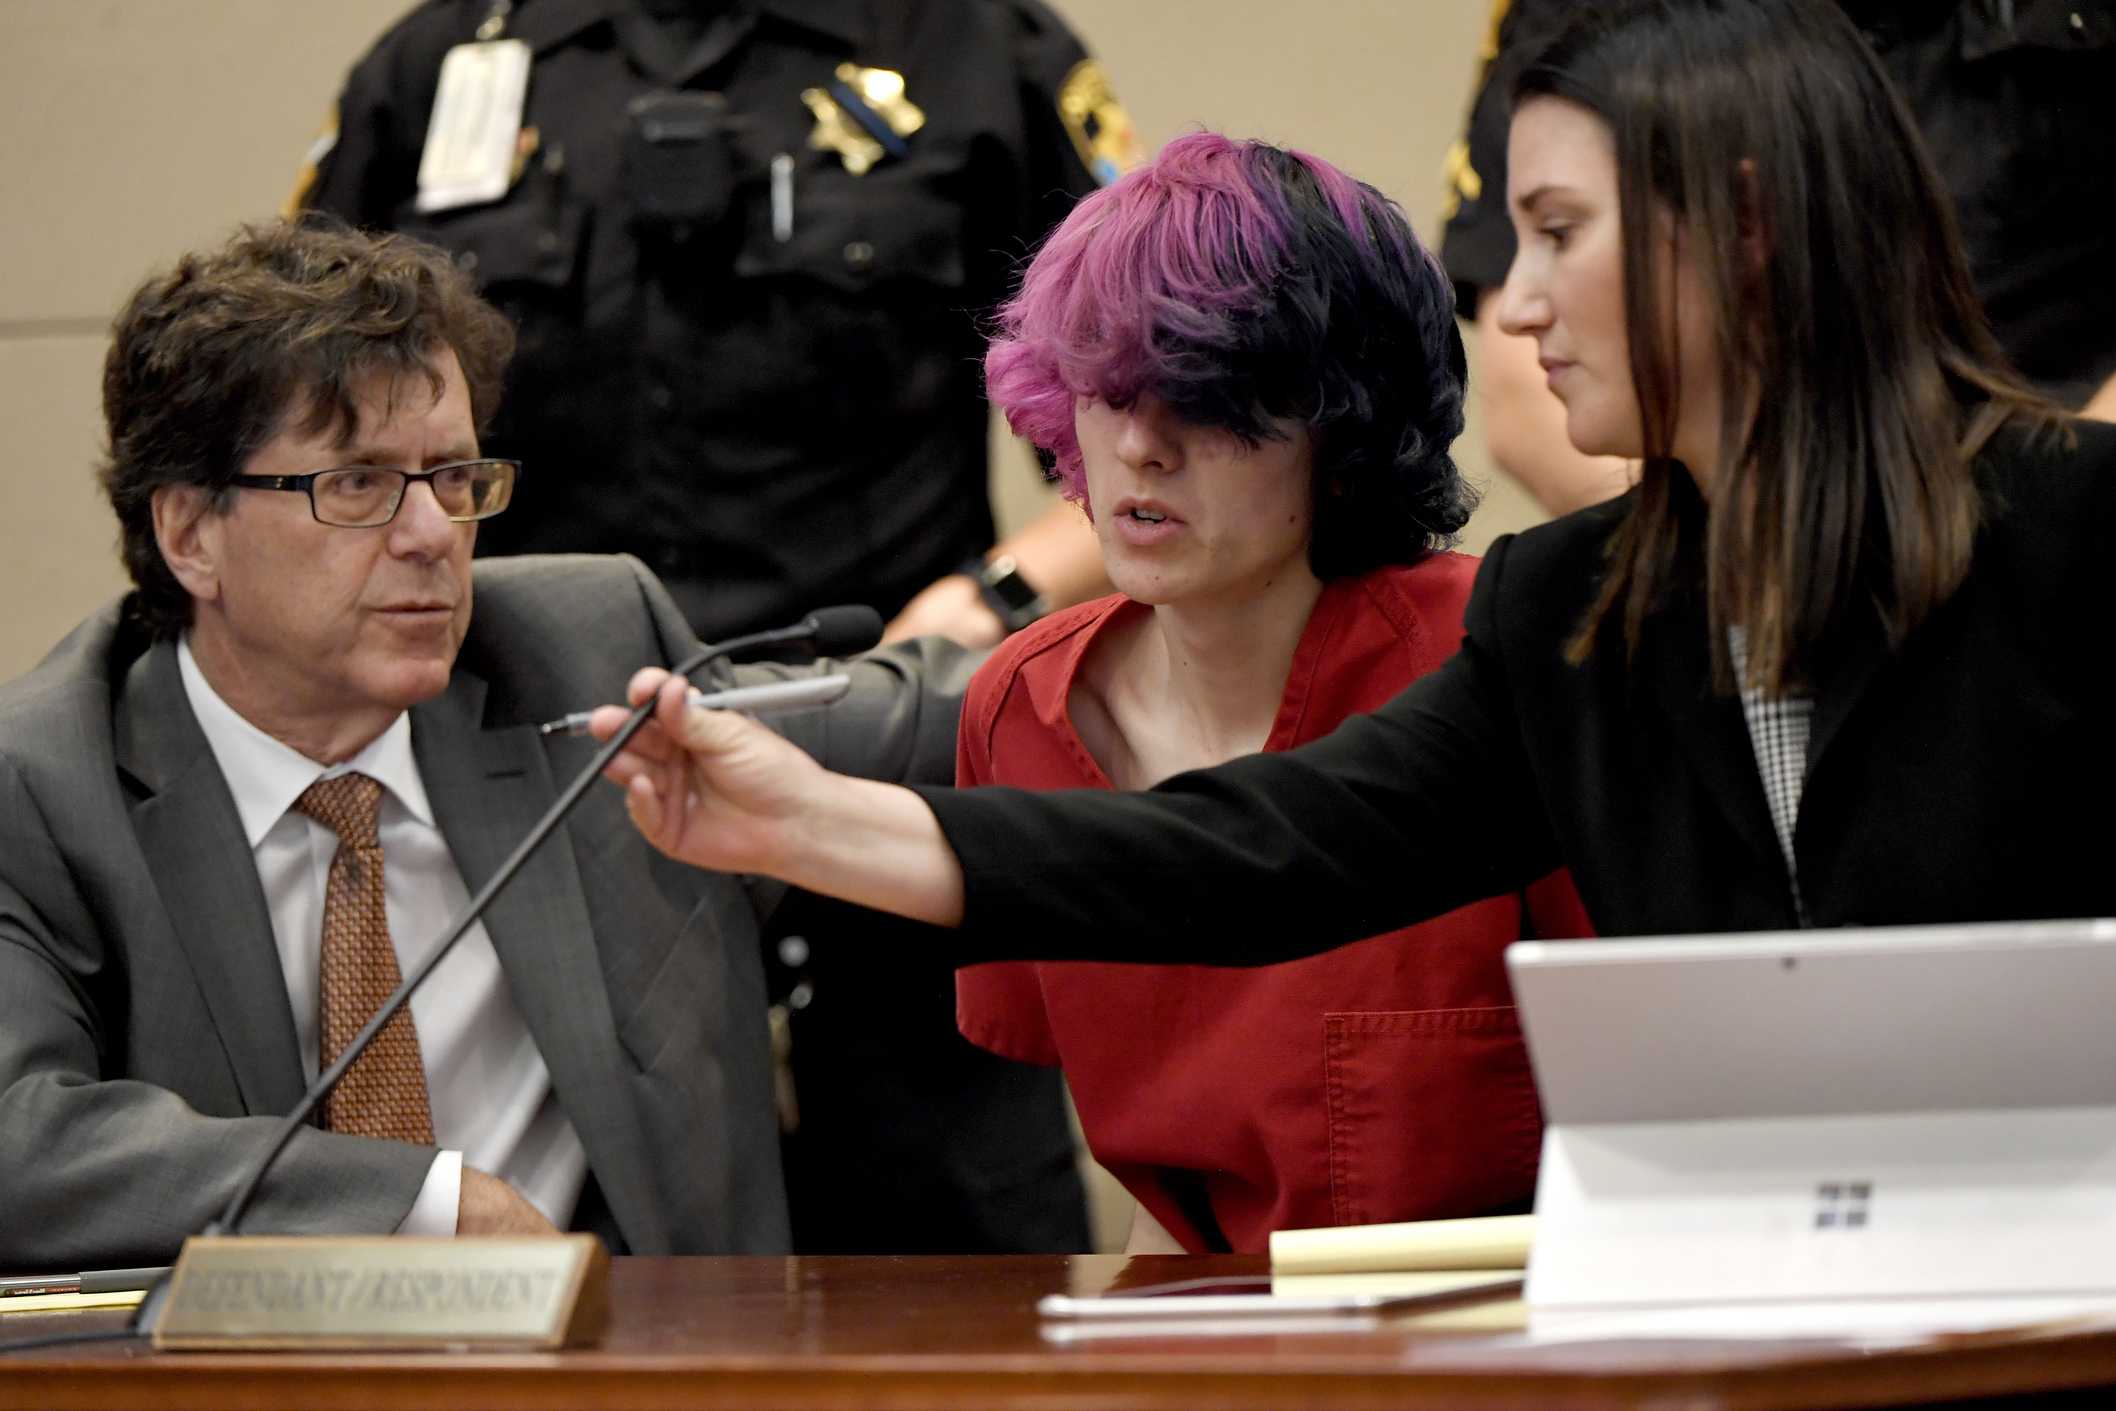 PHOTO: Devon Erickson, an accused STEM school shooter, answers the judge during his advisement at the Douglas County Courthouse in Castle Rock, Colo., May 8, 2019.